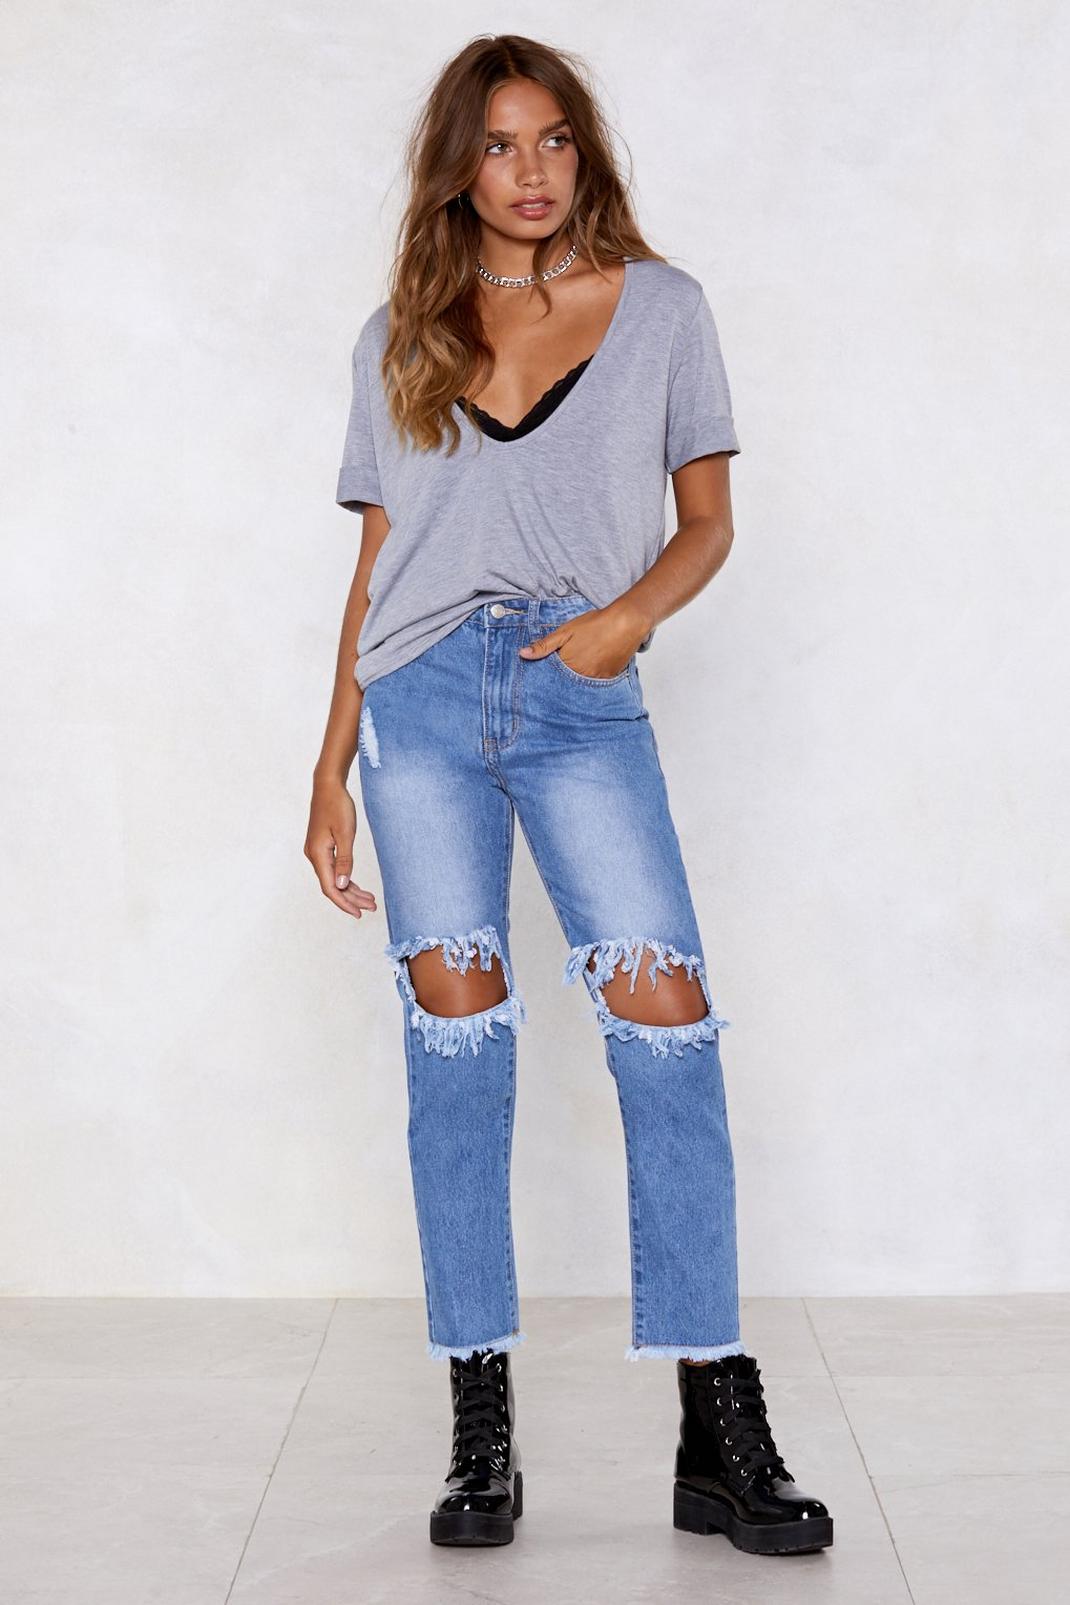 I Smell Trouble Distressed Jeans | Nasty Gal